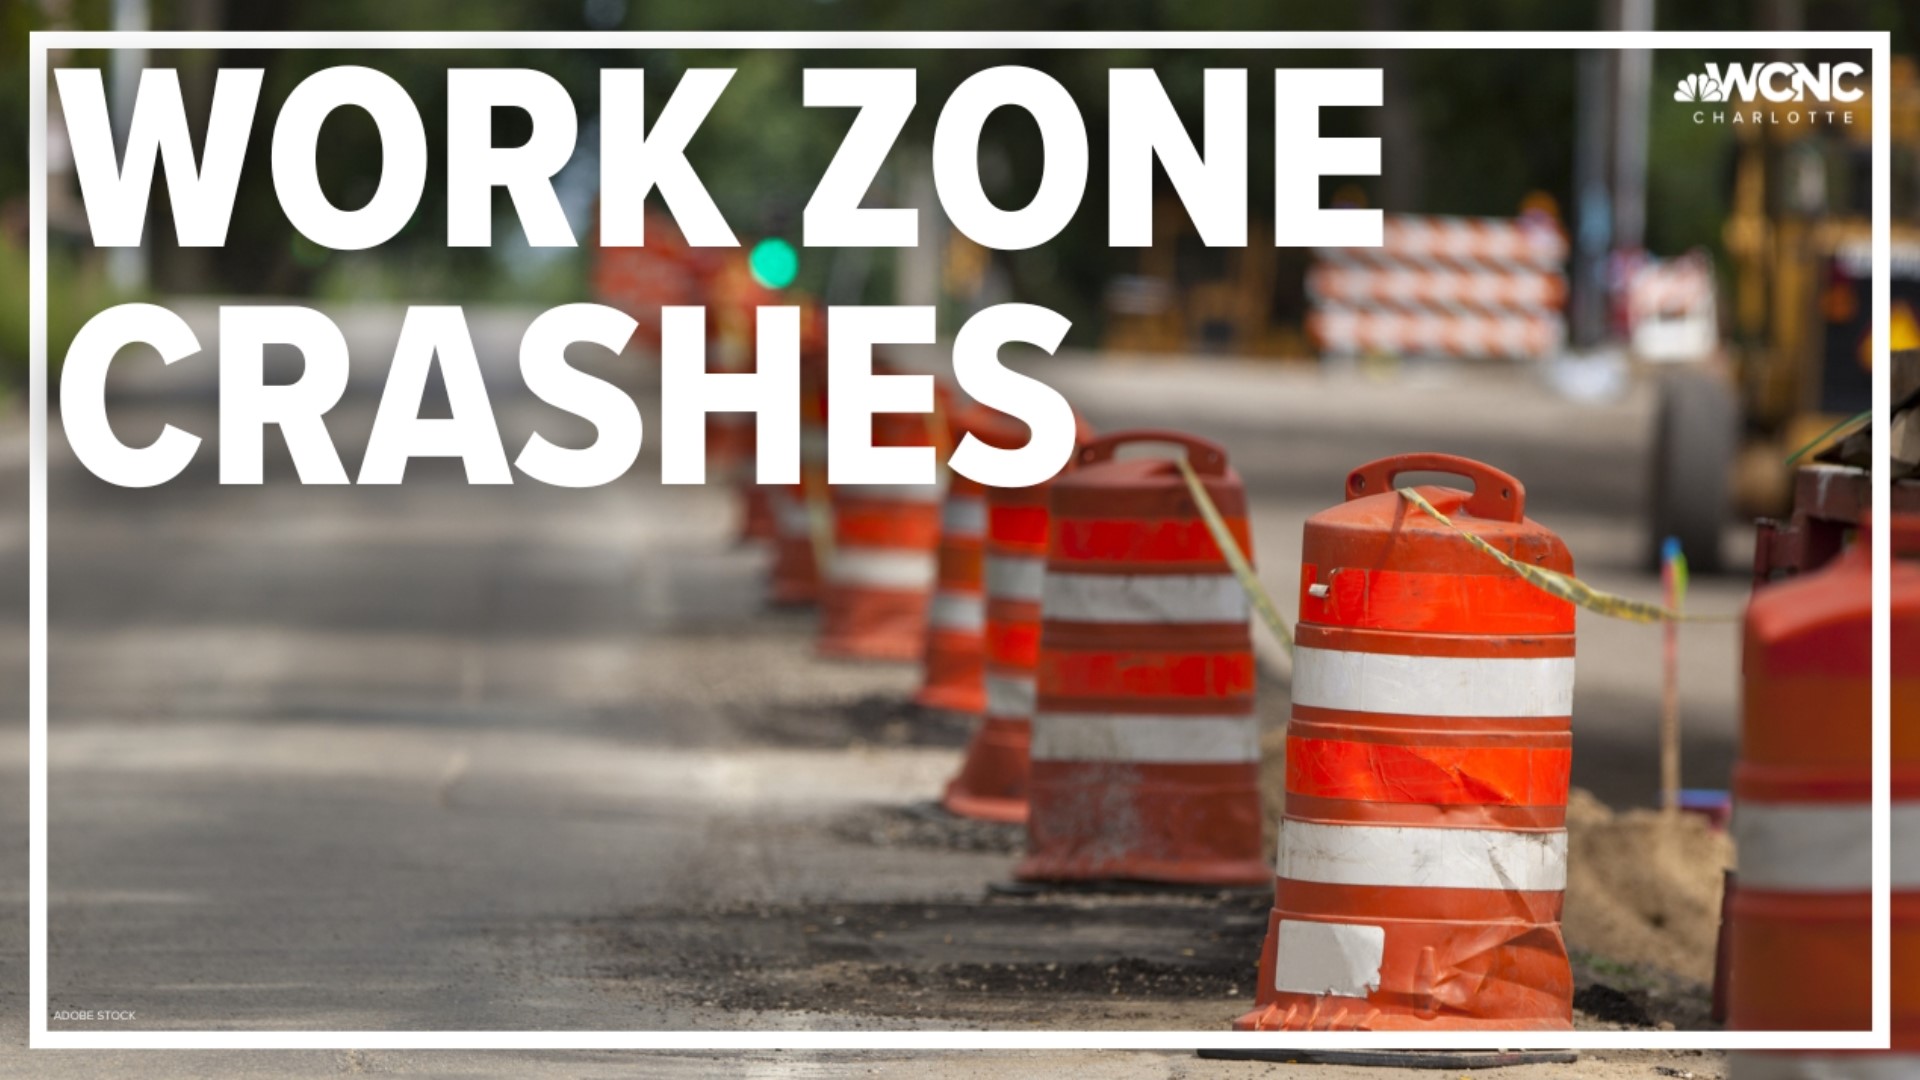 Work zones are especially dangerous for both drivers and construction crews.